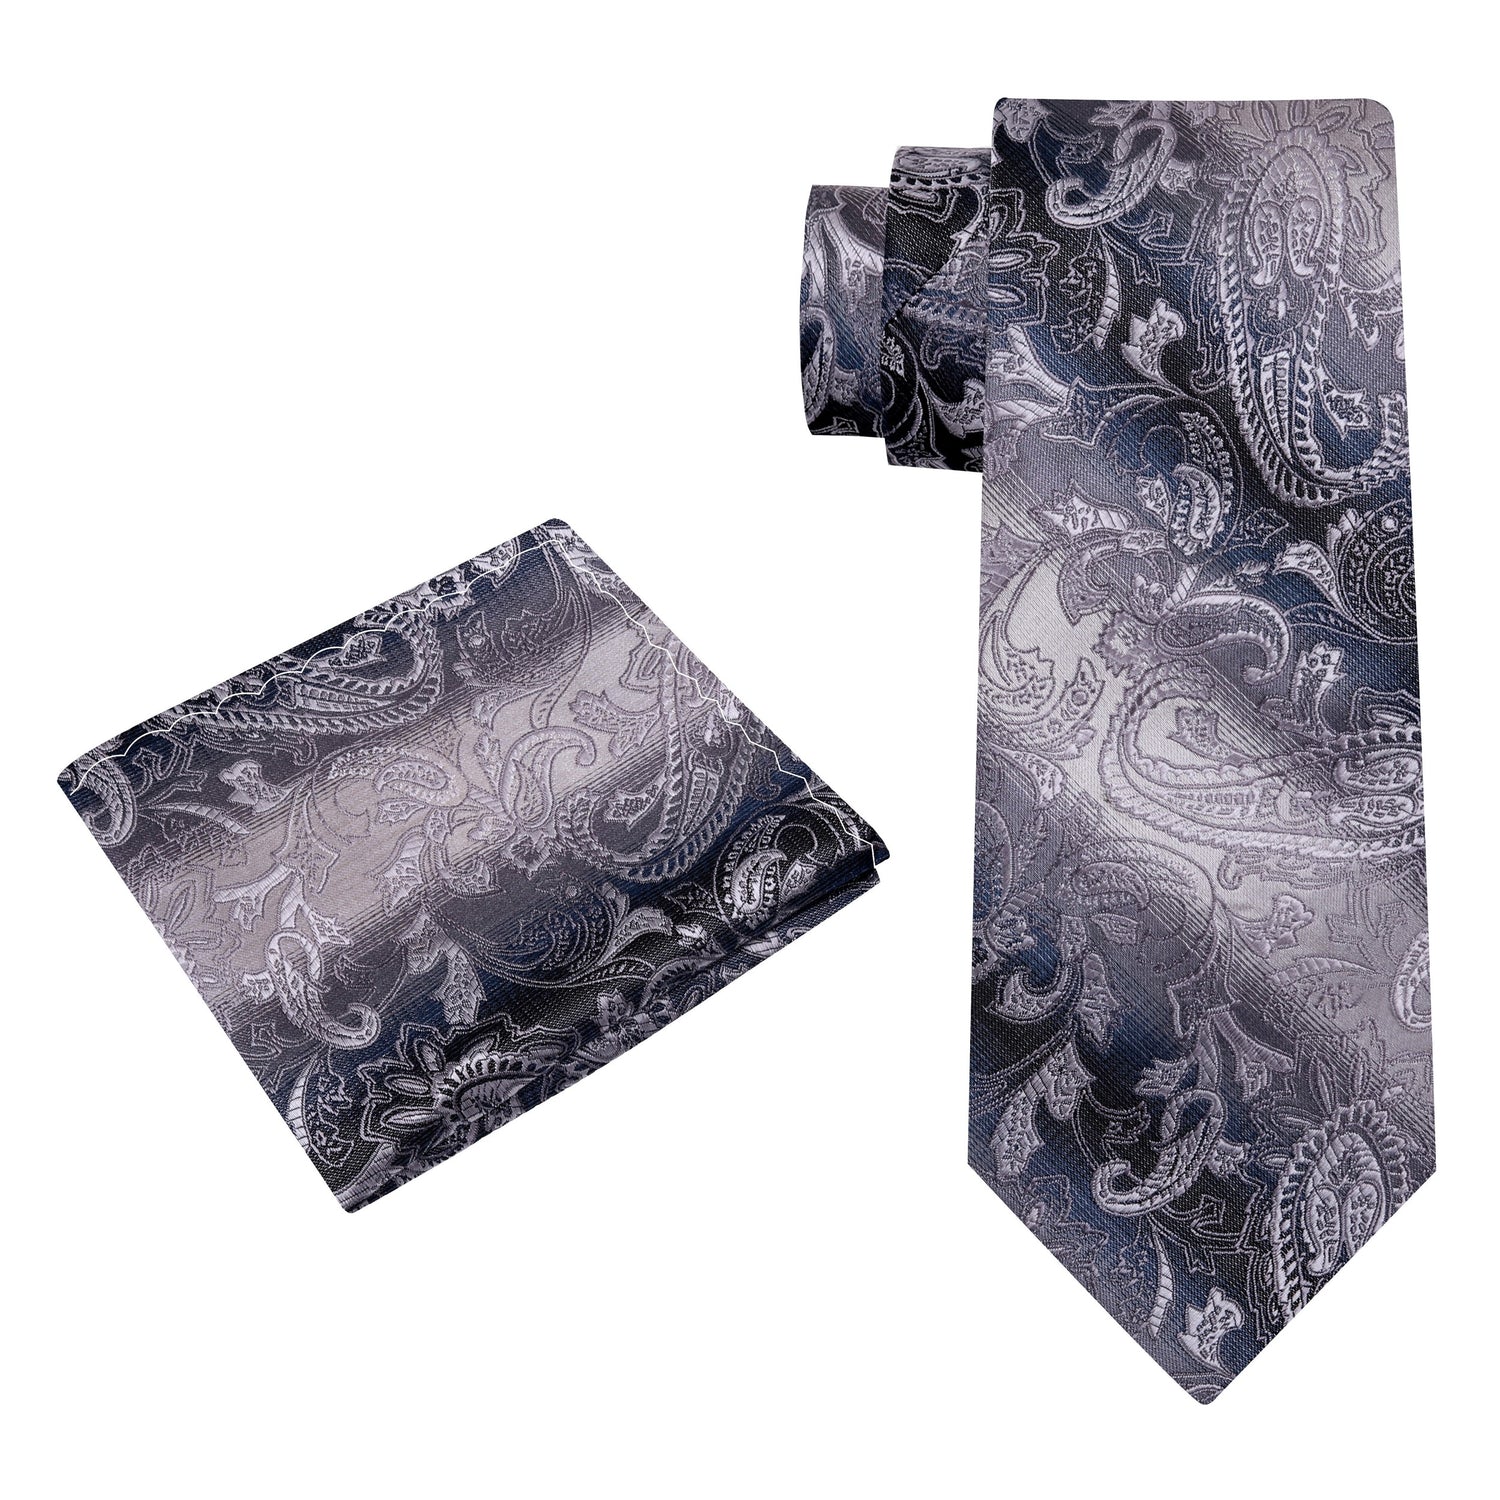 View 2: Grey and Silver Paisley Necktie and  Pocket Square